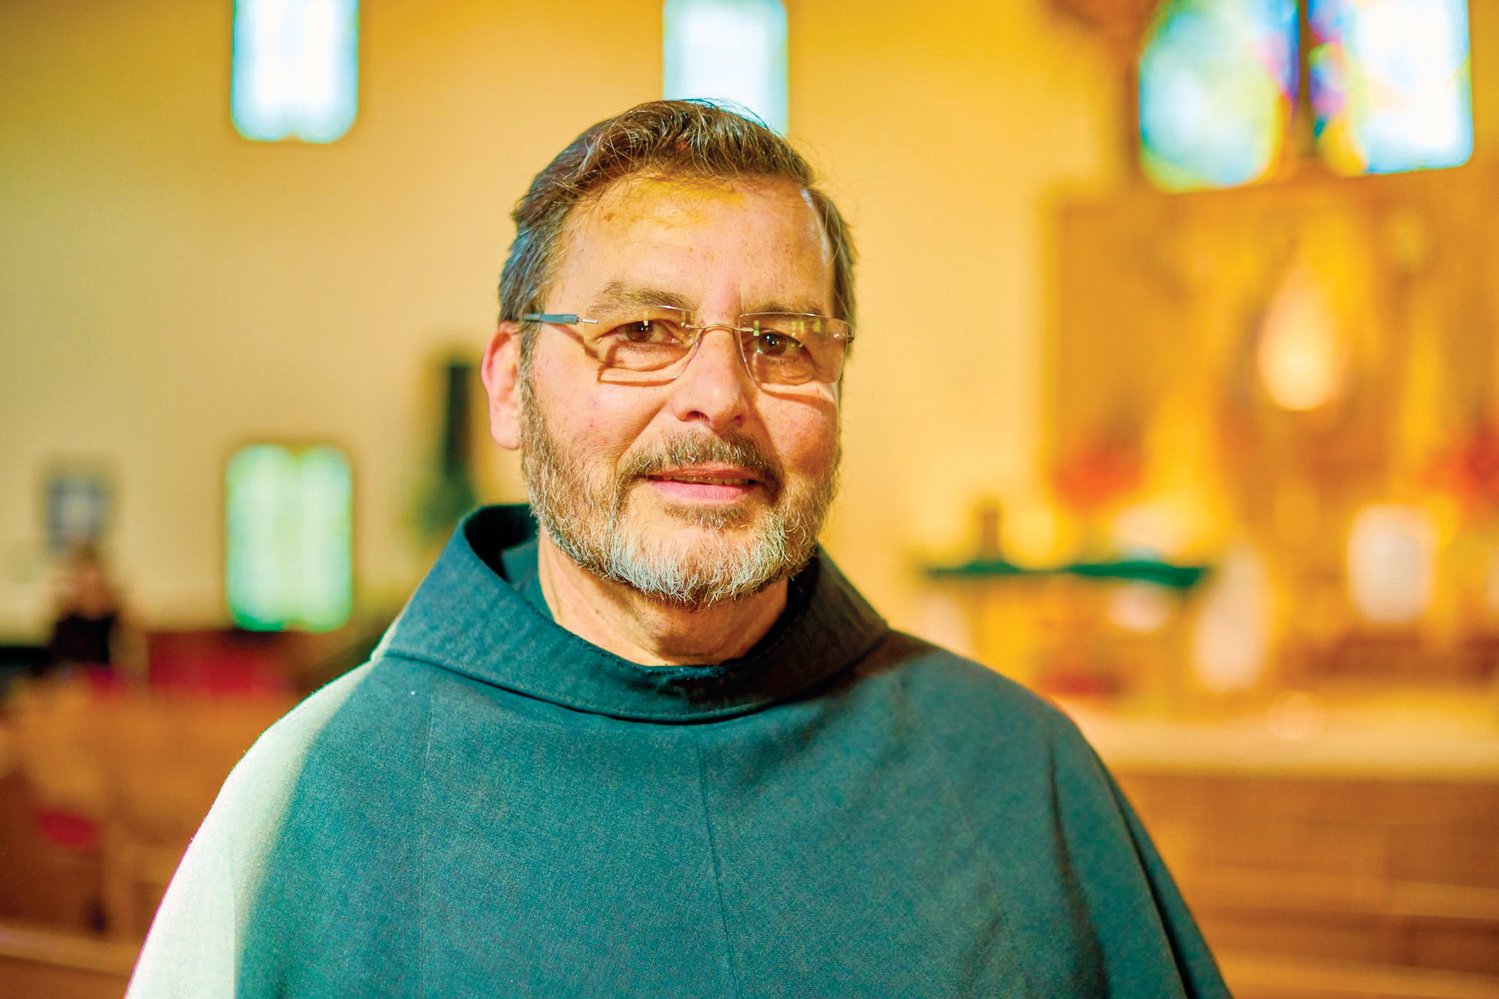 ‘God has given us the ability to develop the vaccine and so I have promulgated getting vaccinated among our people here at St. Julia’s,’ Father Juilo Martinez of St. Julia’s Catholic Church said, ‘and I will continue to do that.’